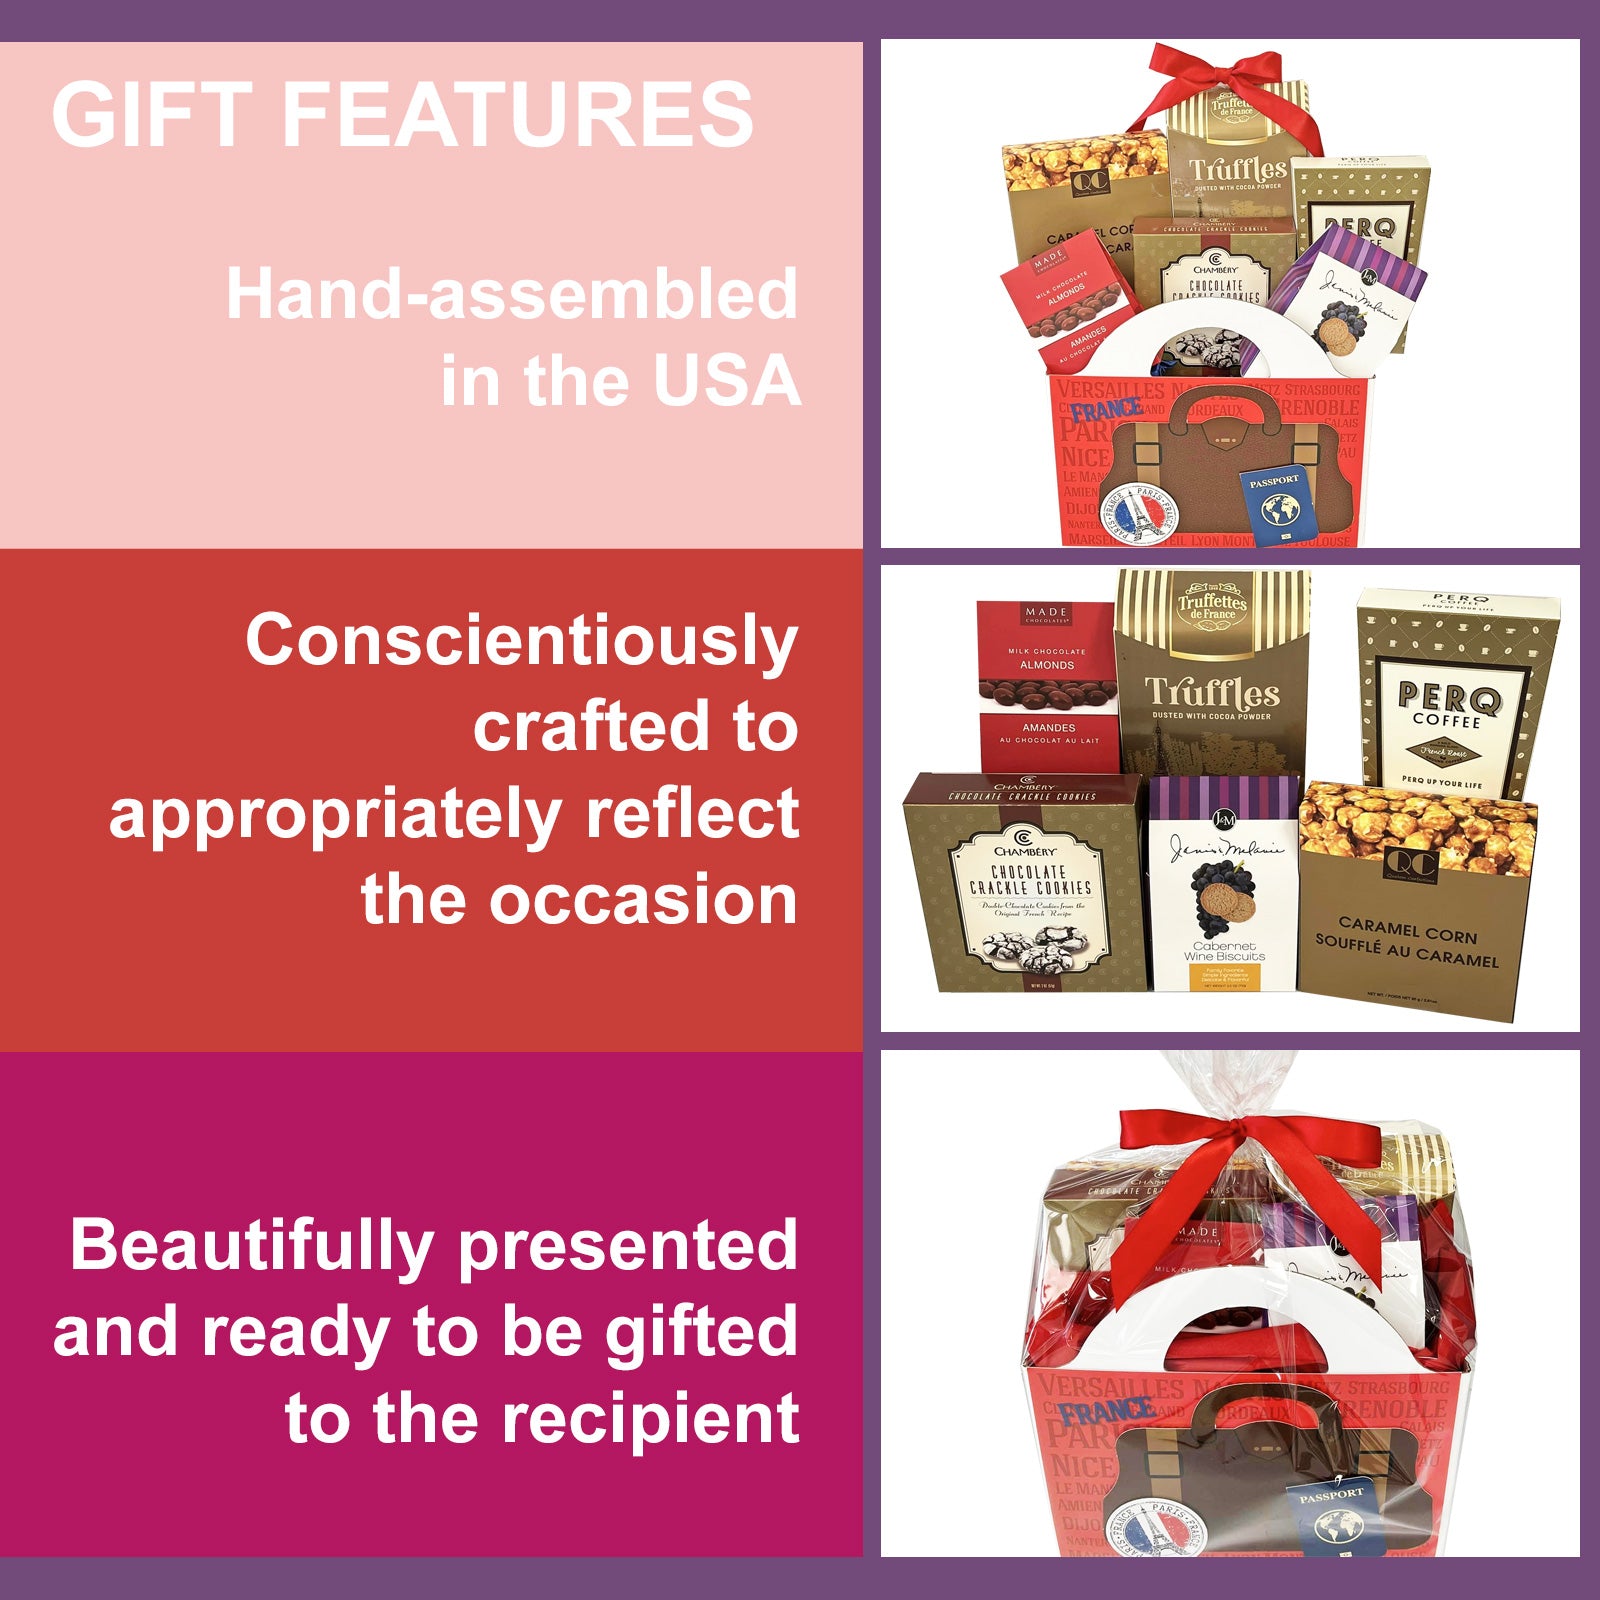 French Savories Gift Box, Epicurean Gifts: Chelsea Market Baskets